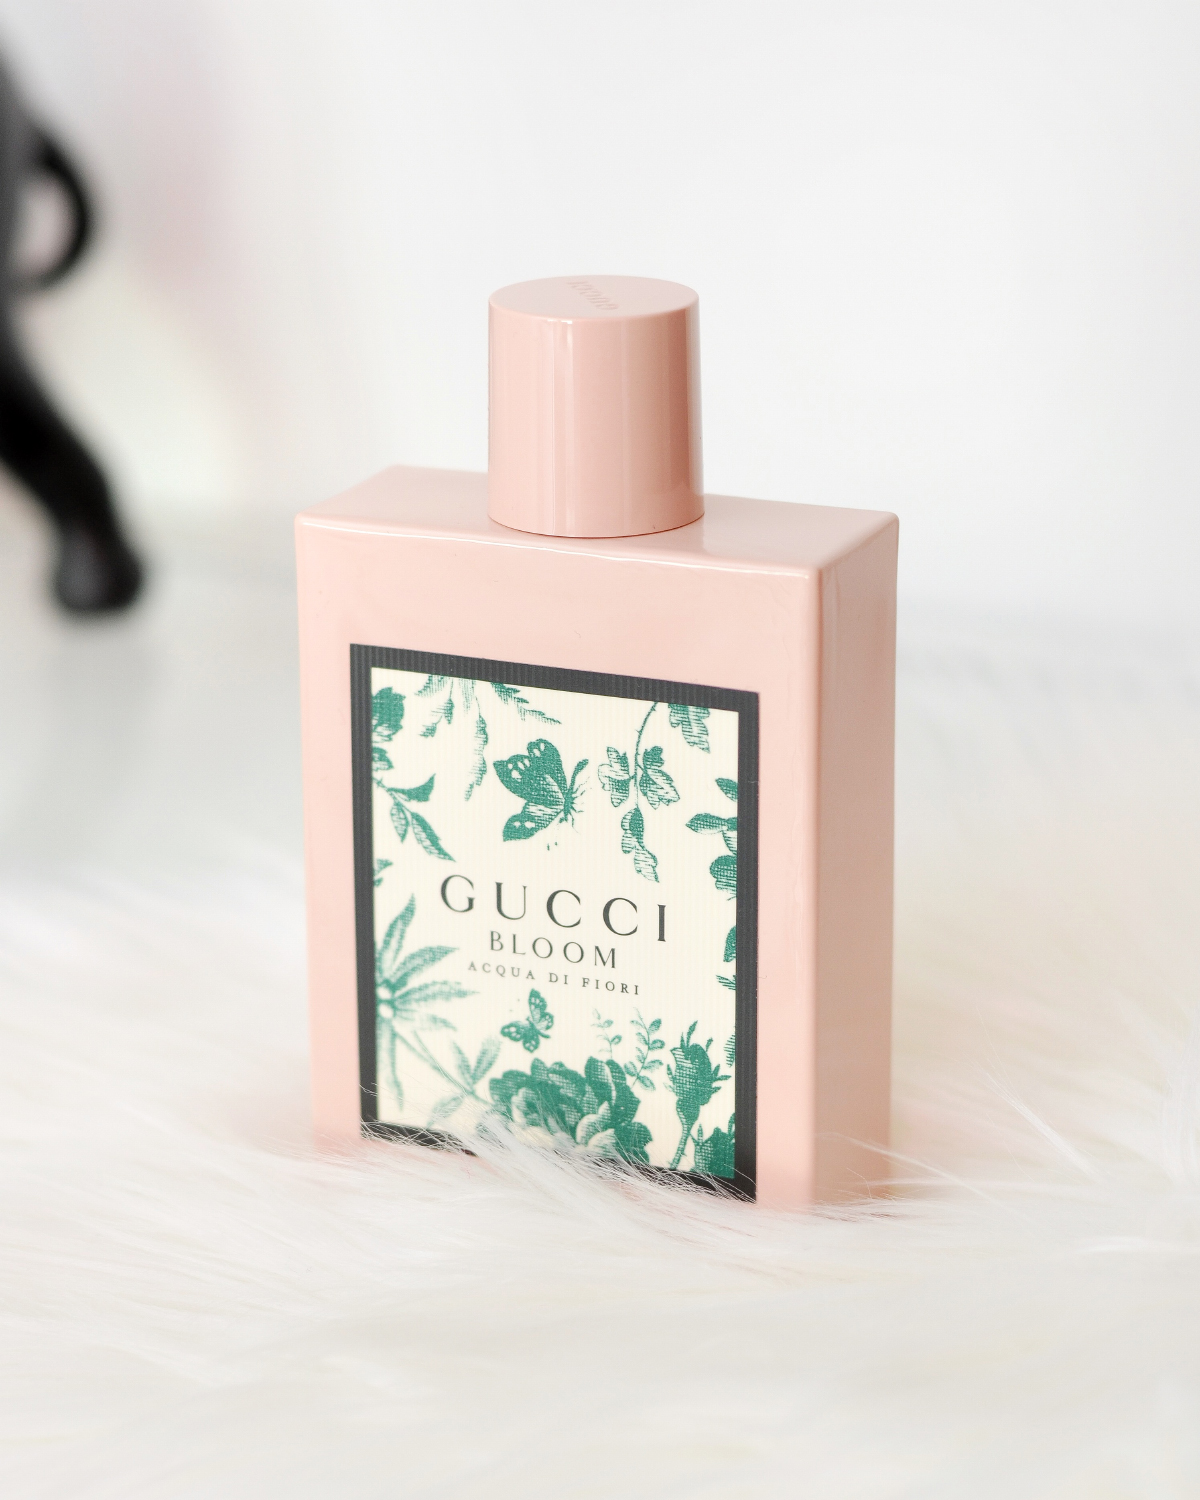 notino Gucci bloom review